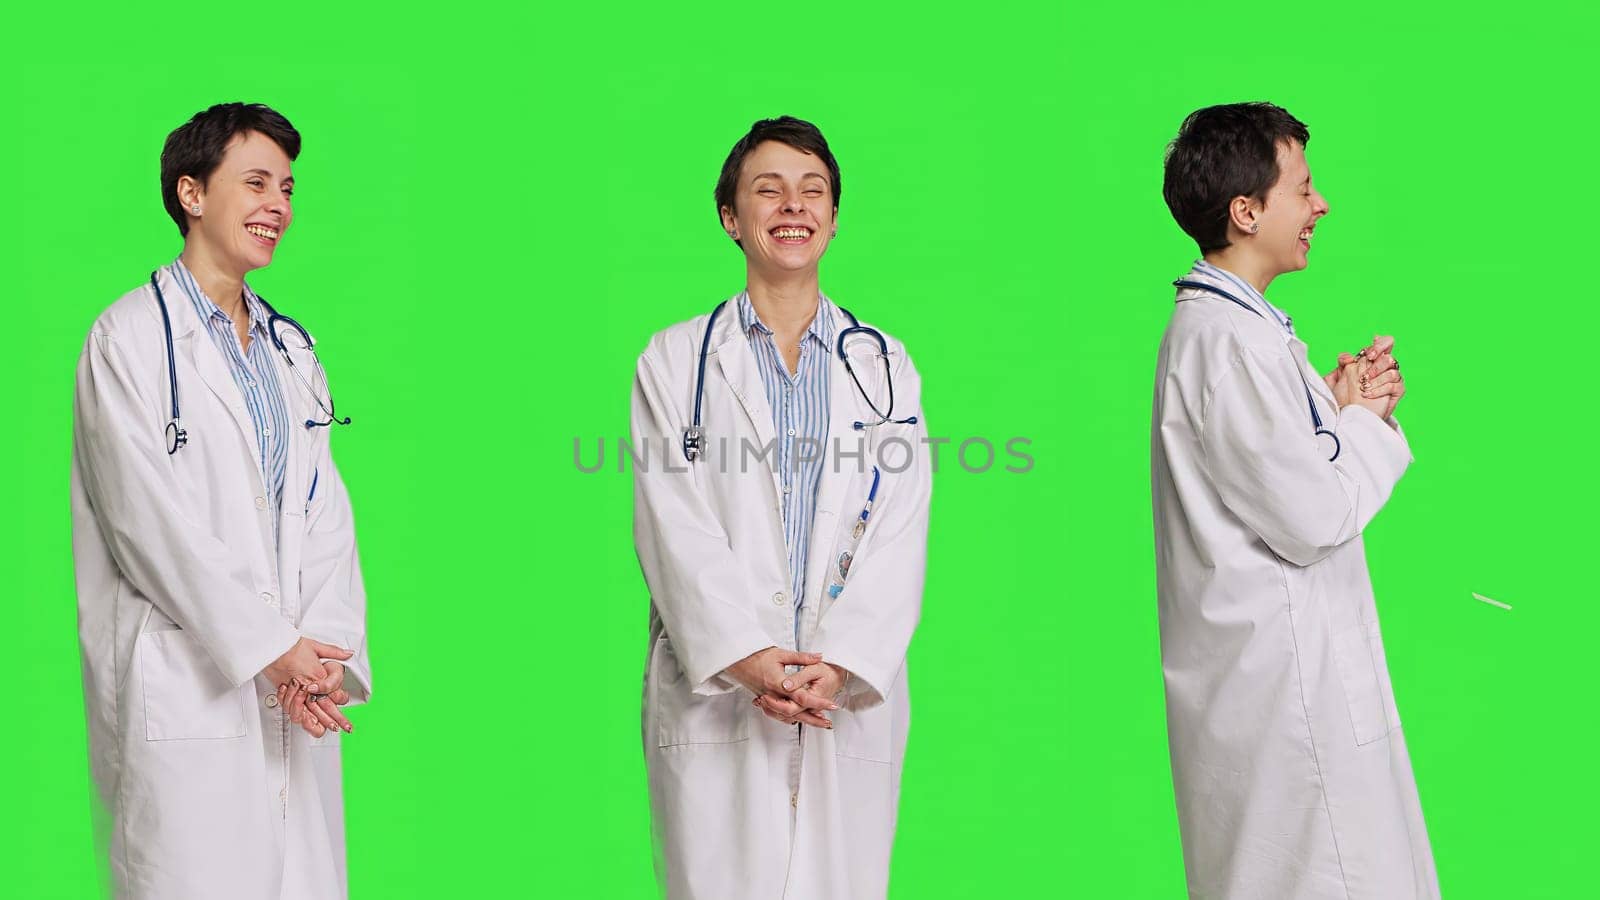 Portrait of general practitioner laughing at something against greenscreen backdrop, feeling joyful and confident with her healthcare expertise. Woman medic in white coat smiling in studio. Camera B.